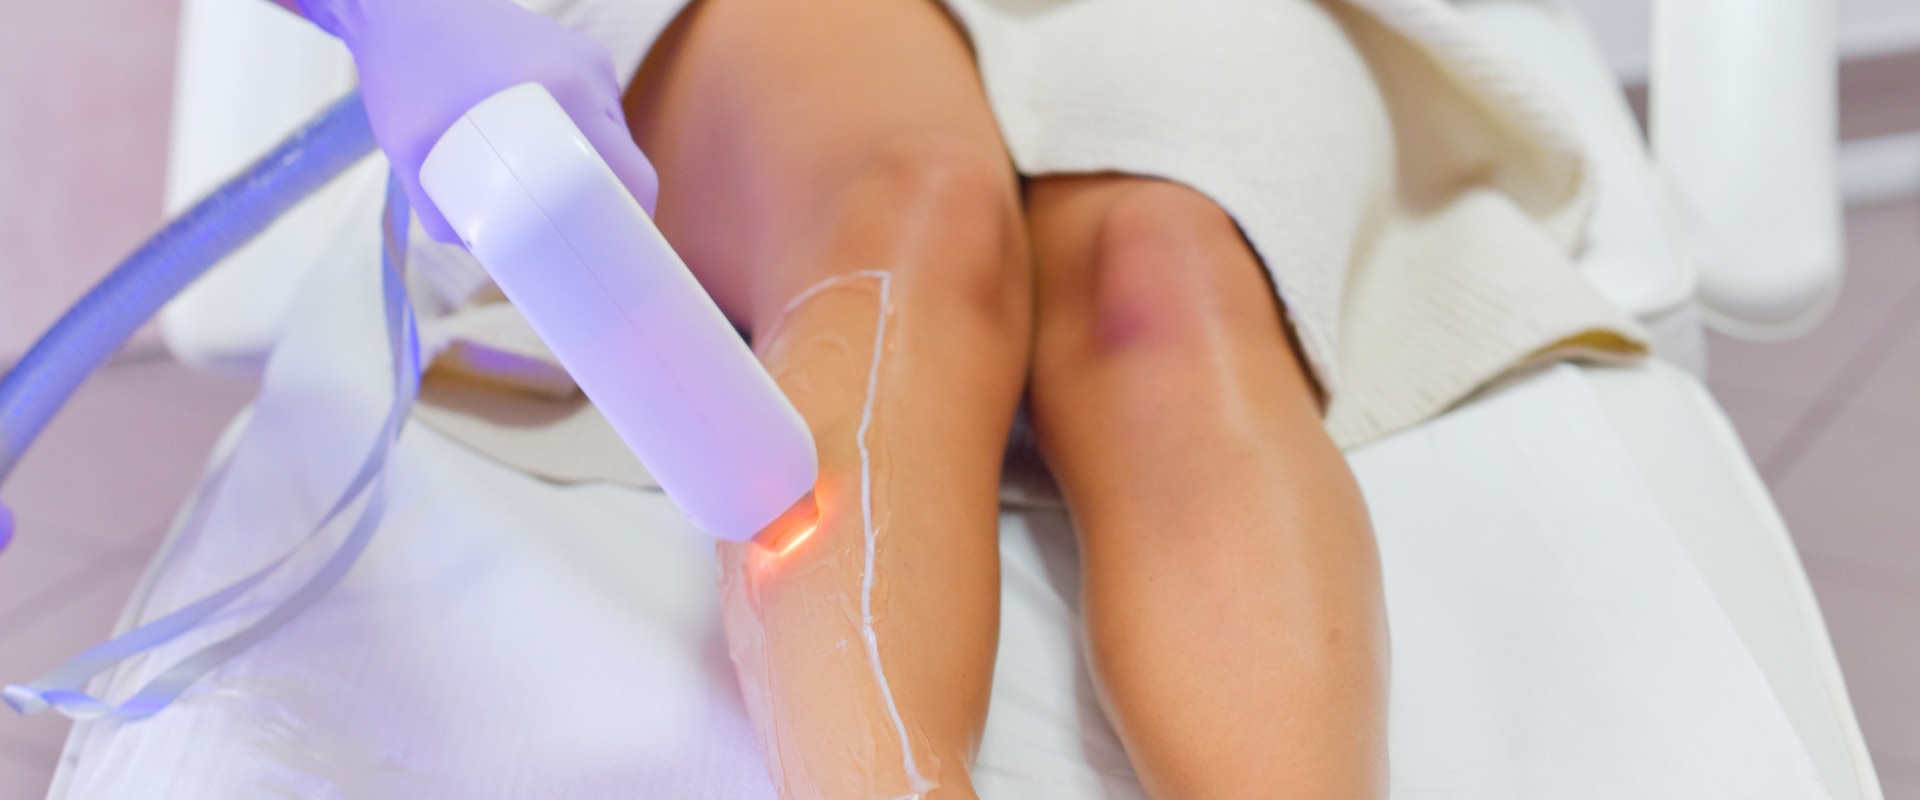 Does Laser Hair Removal Not Work for Everyone? - A Comprehensive Guide